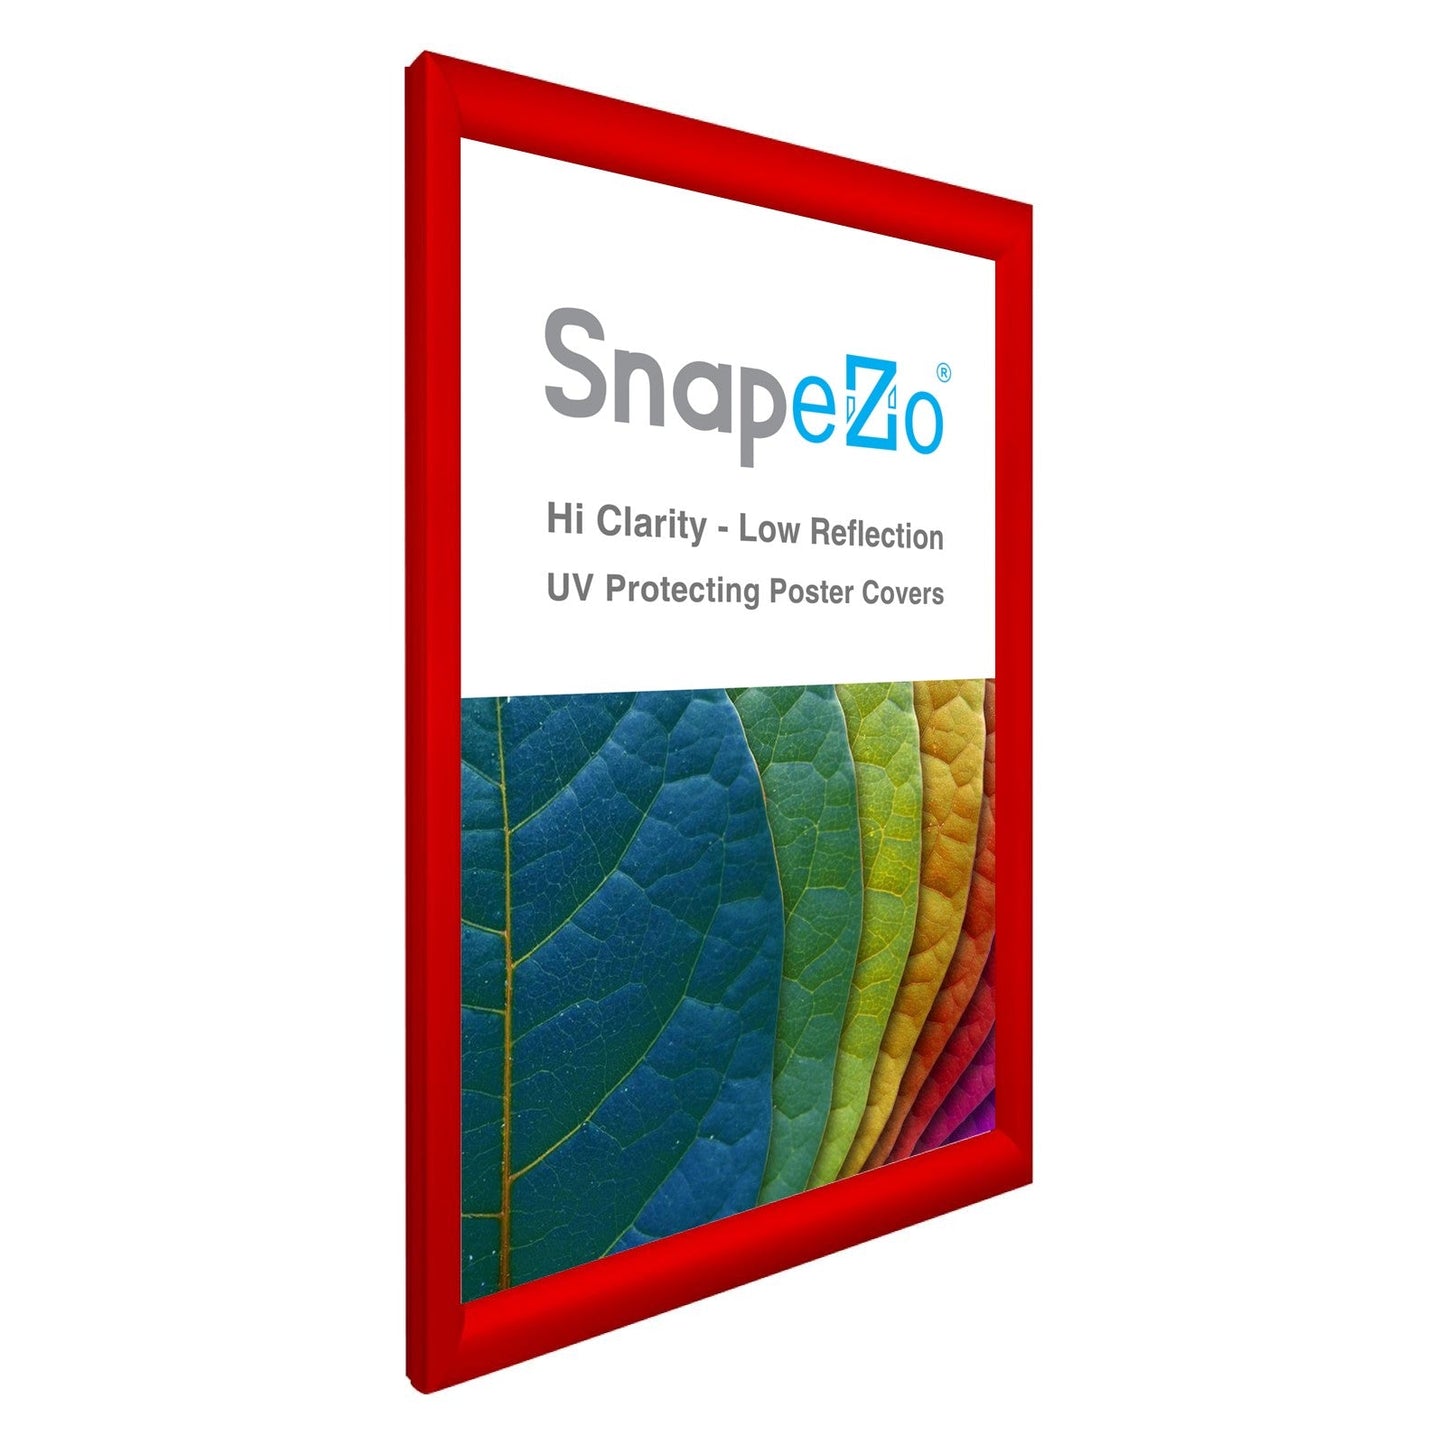 Load image into Gallery viewer, 14x22 Red SnapeZo® Snap Frame - 1.2&amp;quot; Profile
